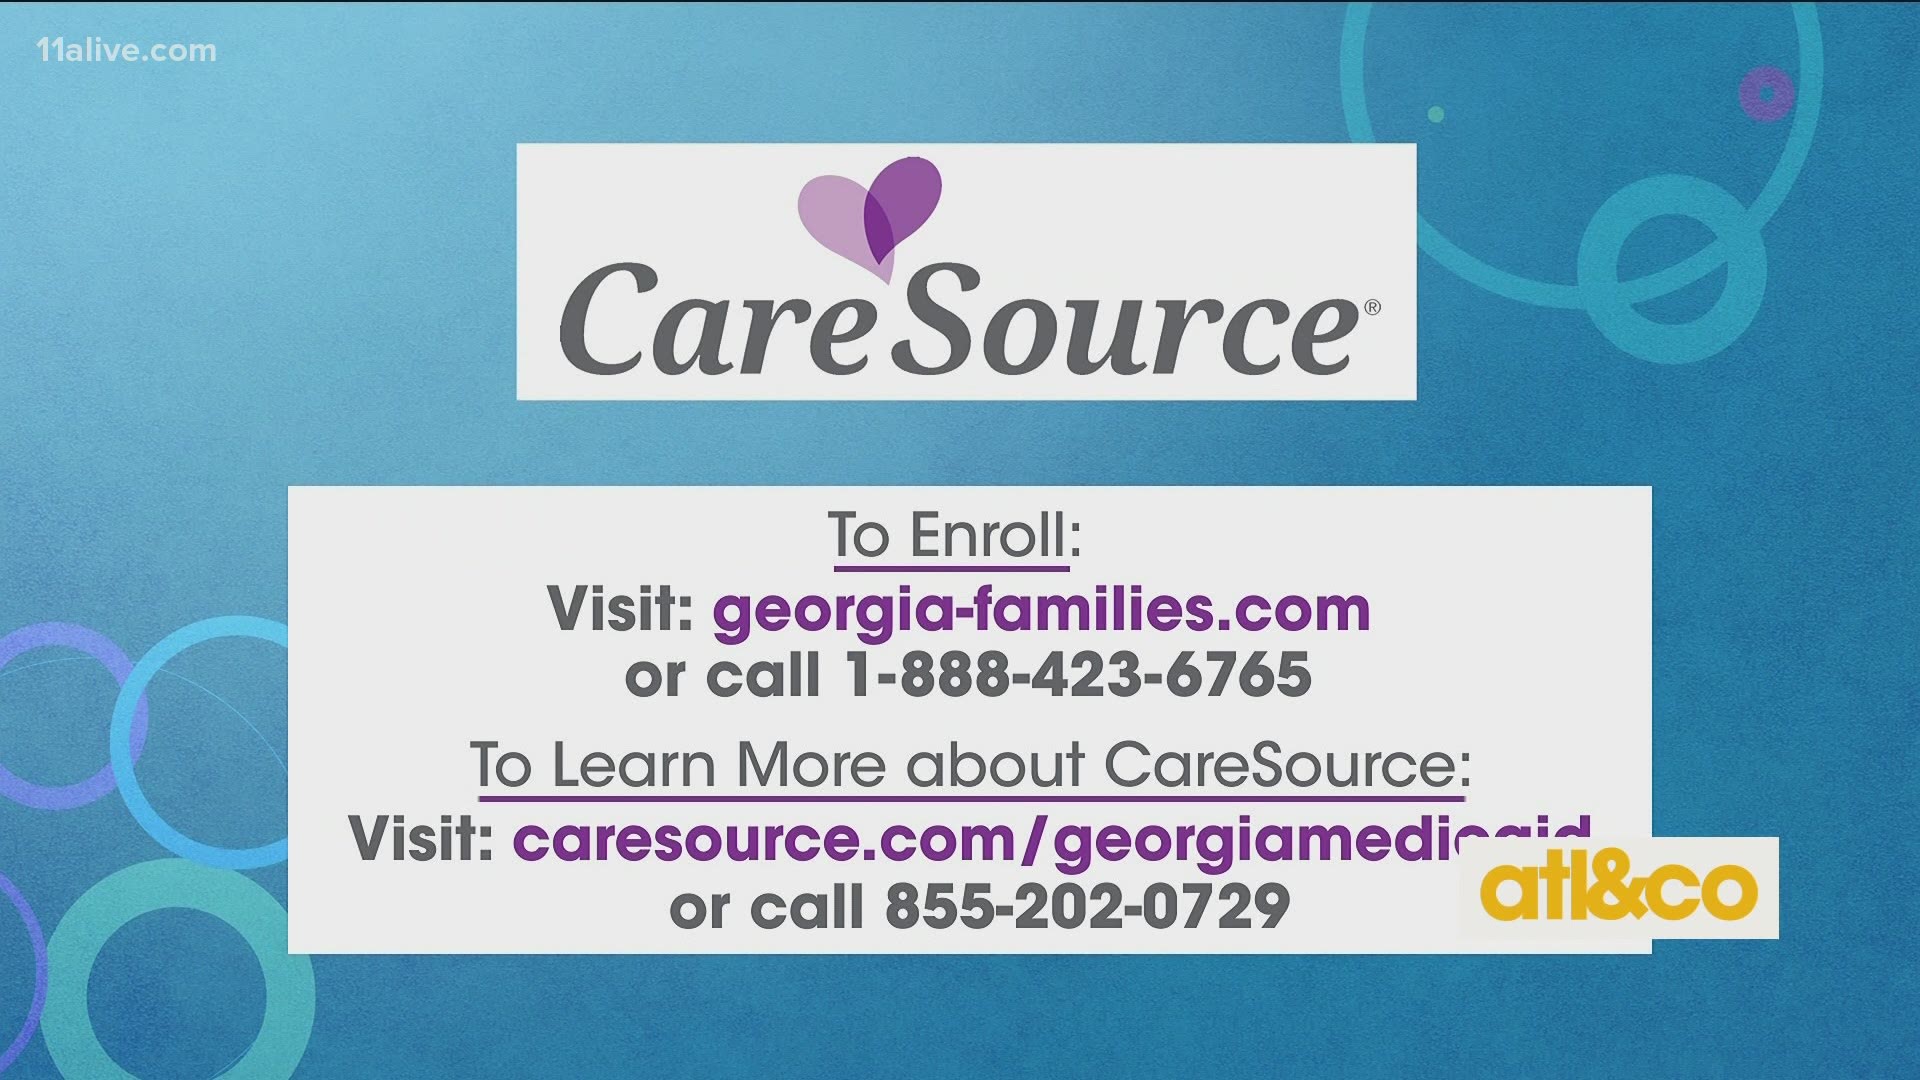 When does caresource update their website baxter recycling center